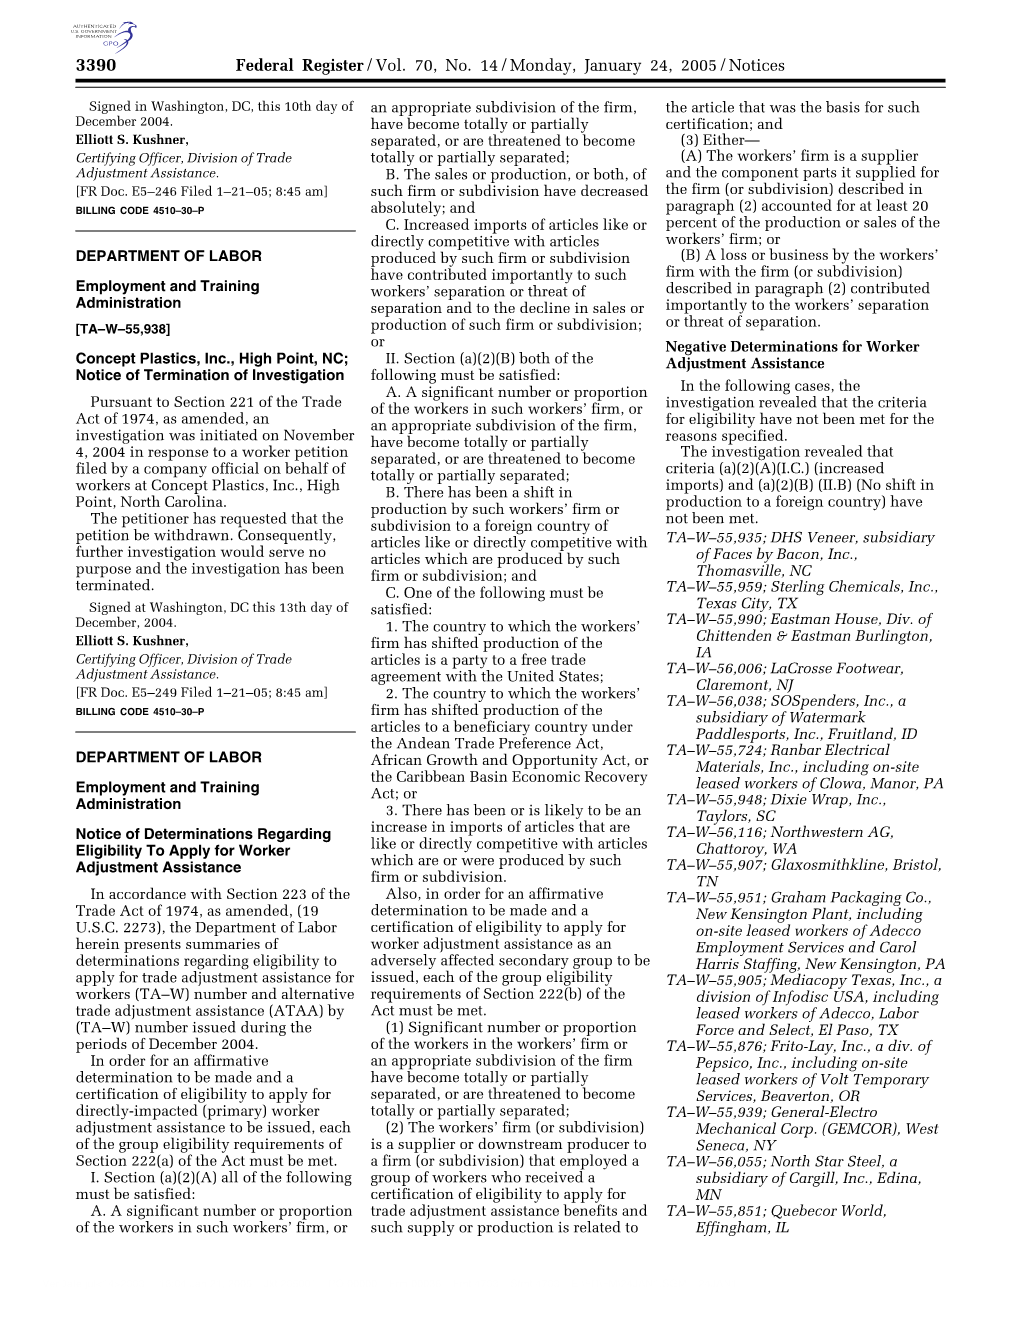 Federal Register/Vol. 70, No. 14/Monday, January 24, 2005/Notices